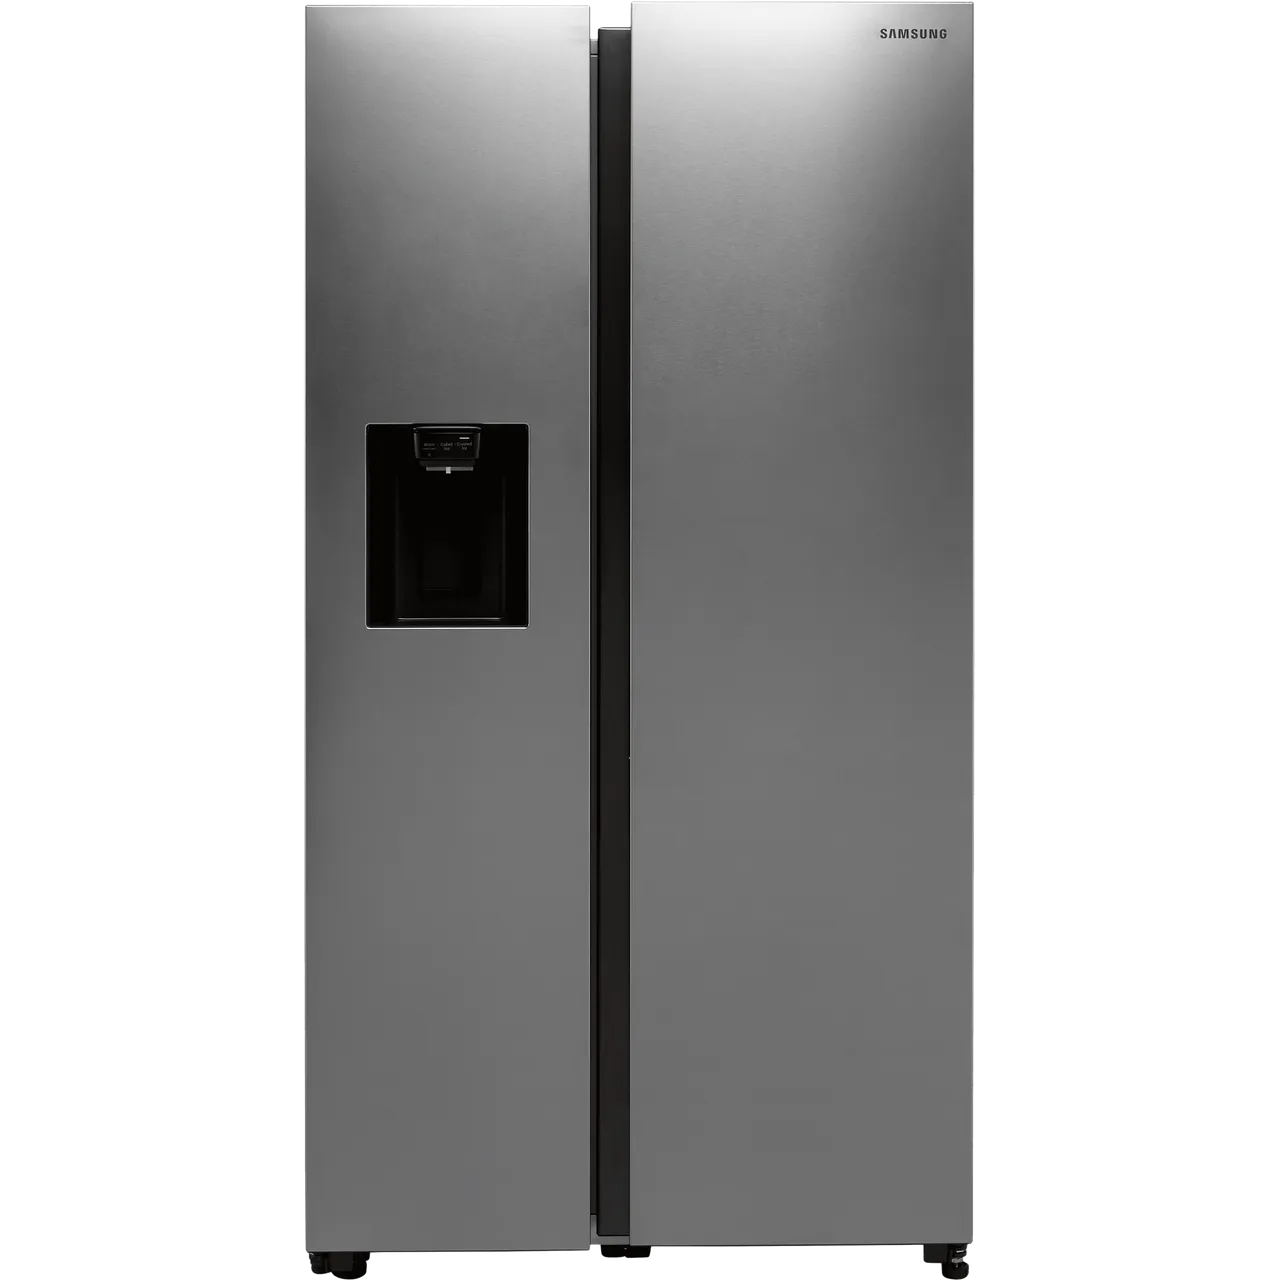 Samsung RS68A8820S9 Fridge Freezer American Plumbed Stainless Steel GRADE A